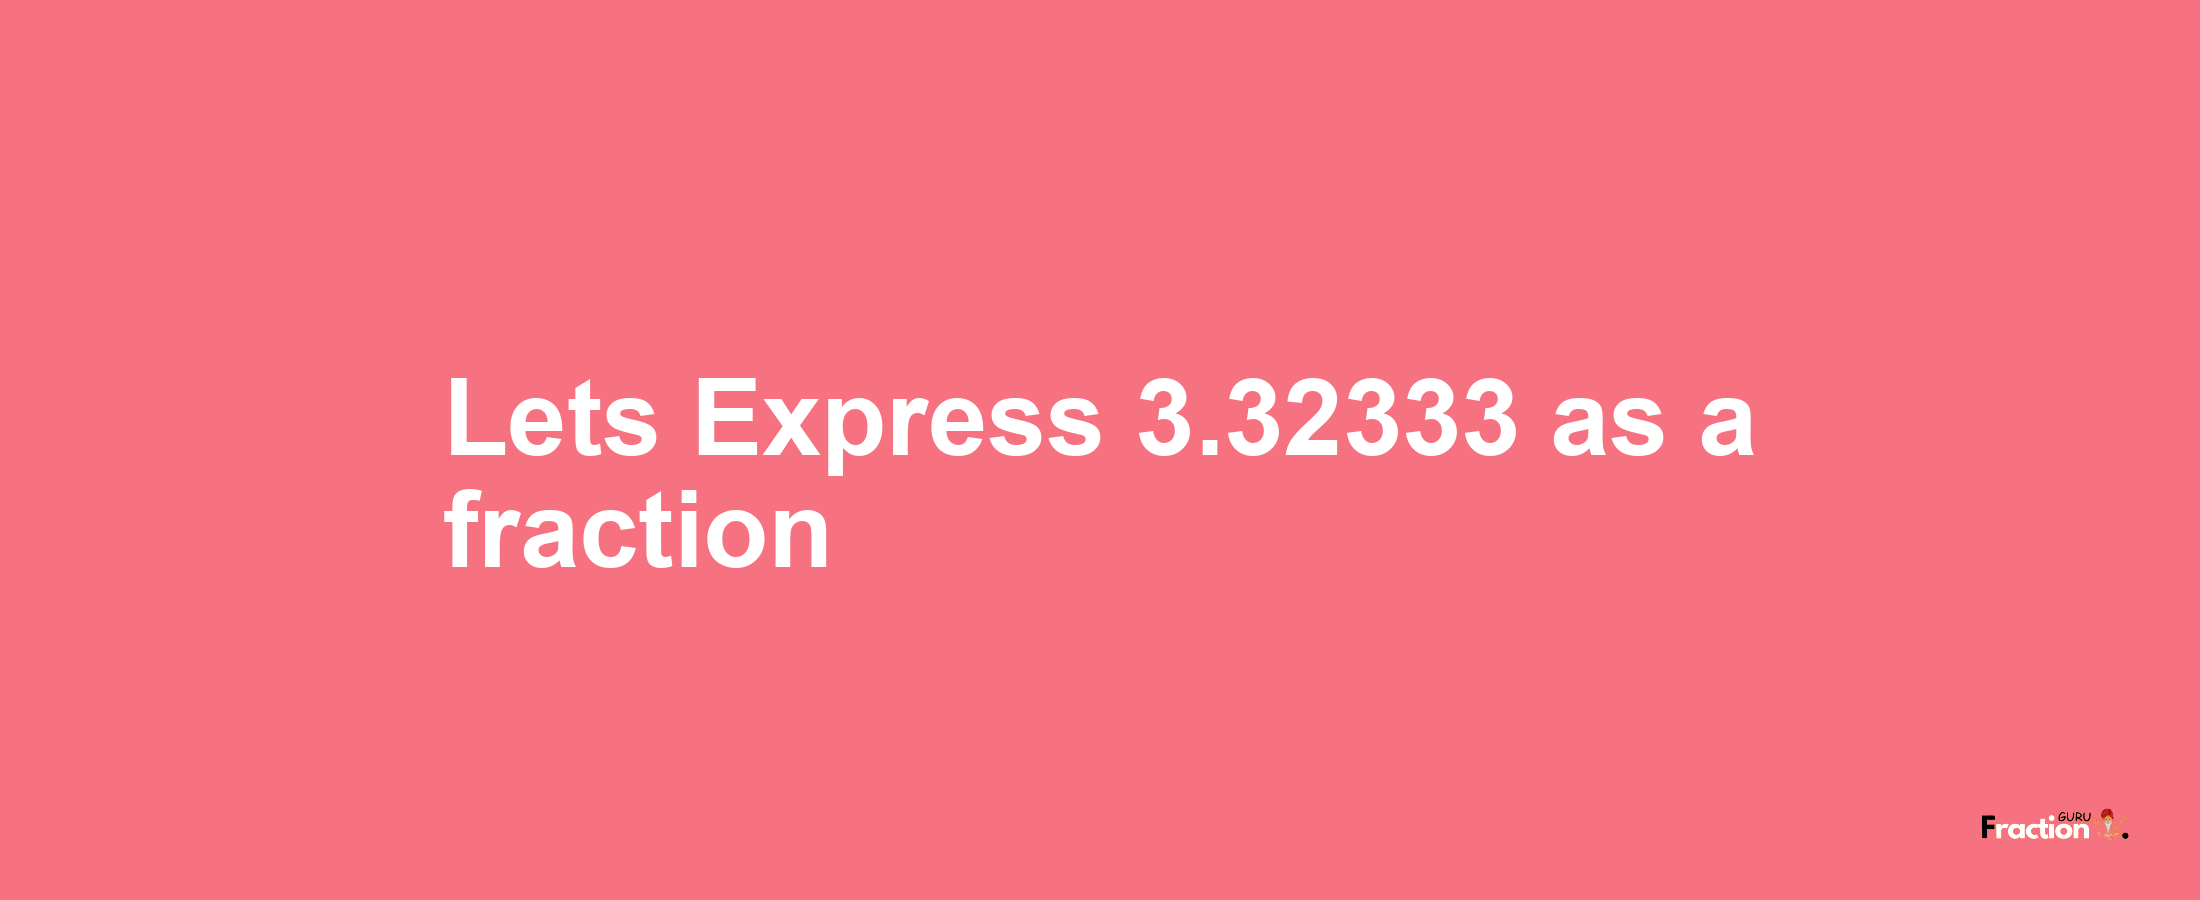 Lets Express 3.32333 as afraction